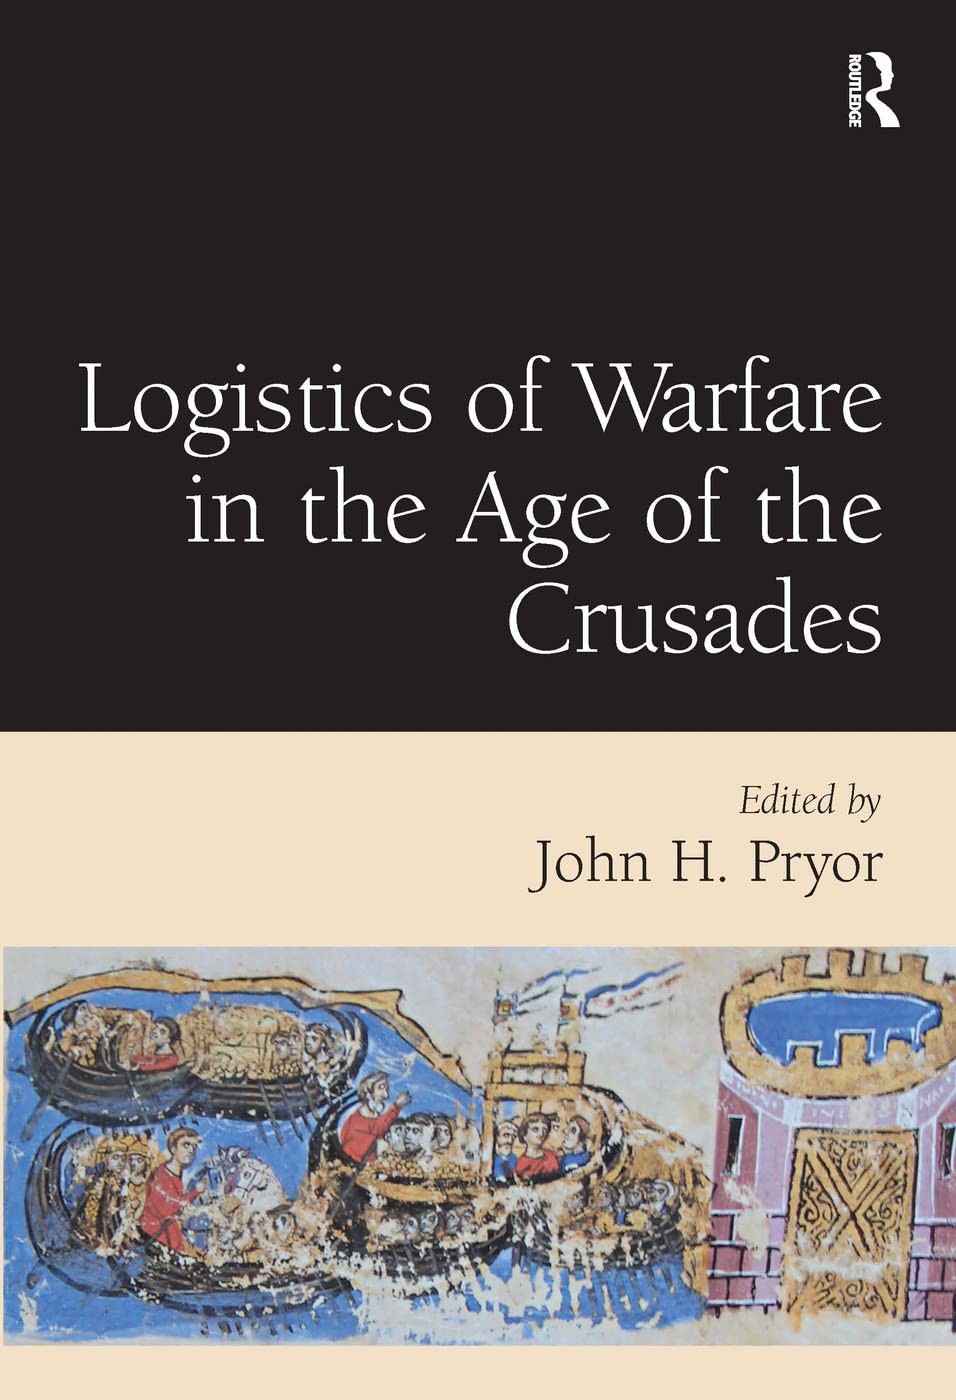 Logistics of Warfare in the Age of the Crusades: Proceedings of a Workshop Held at the Centre for Medieval Studies, University of Sydney, 30 September to 4 October 2002